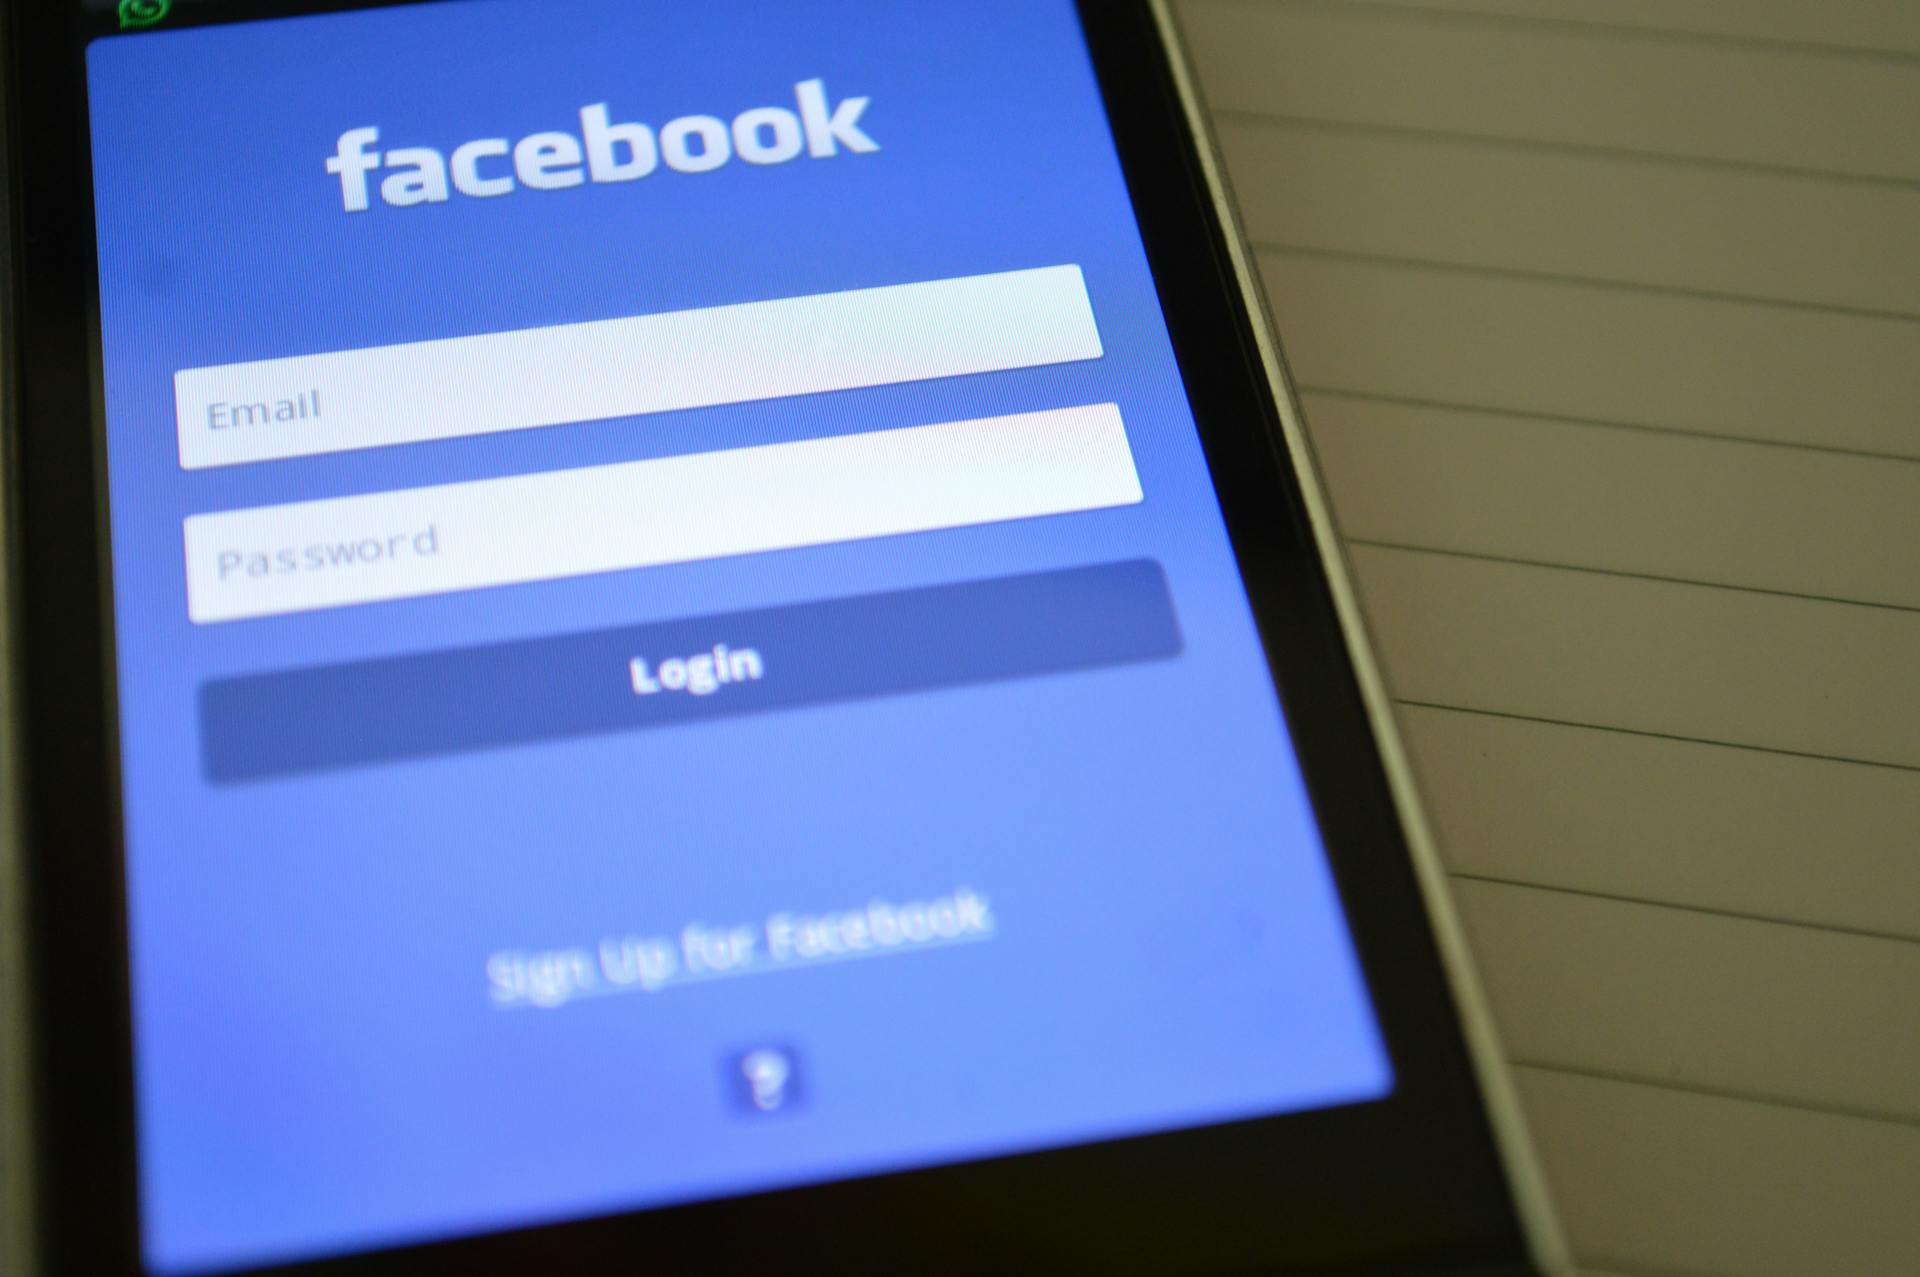 Facebook on Mobile: Exploring Features